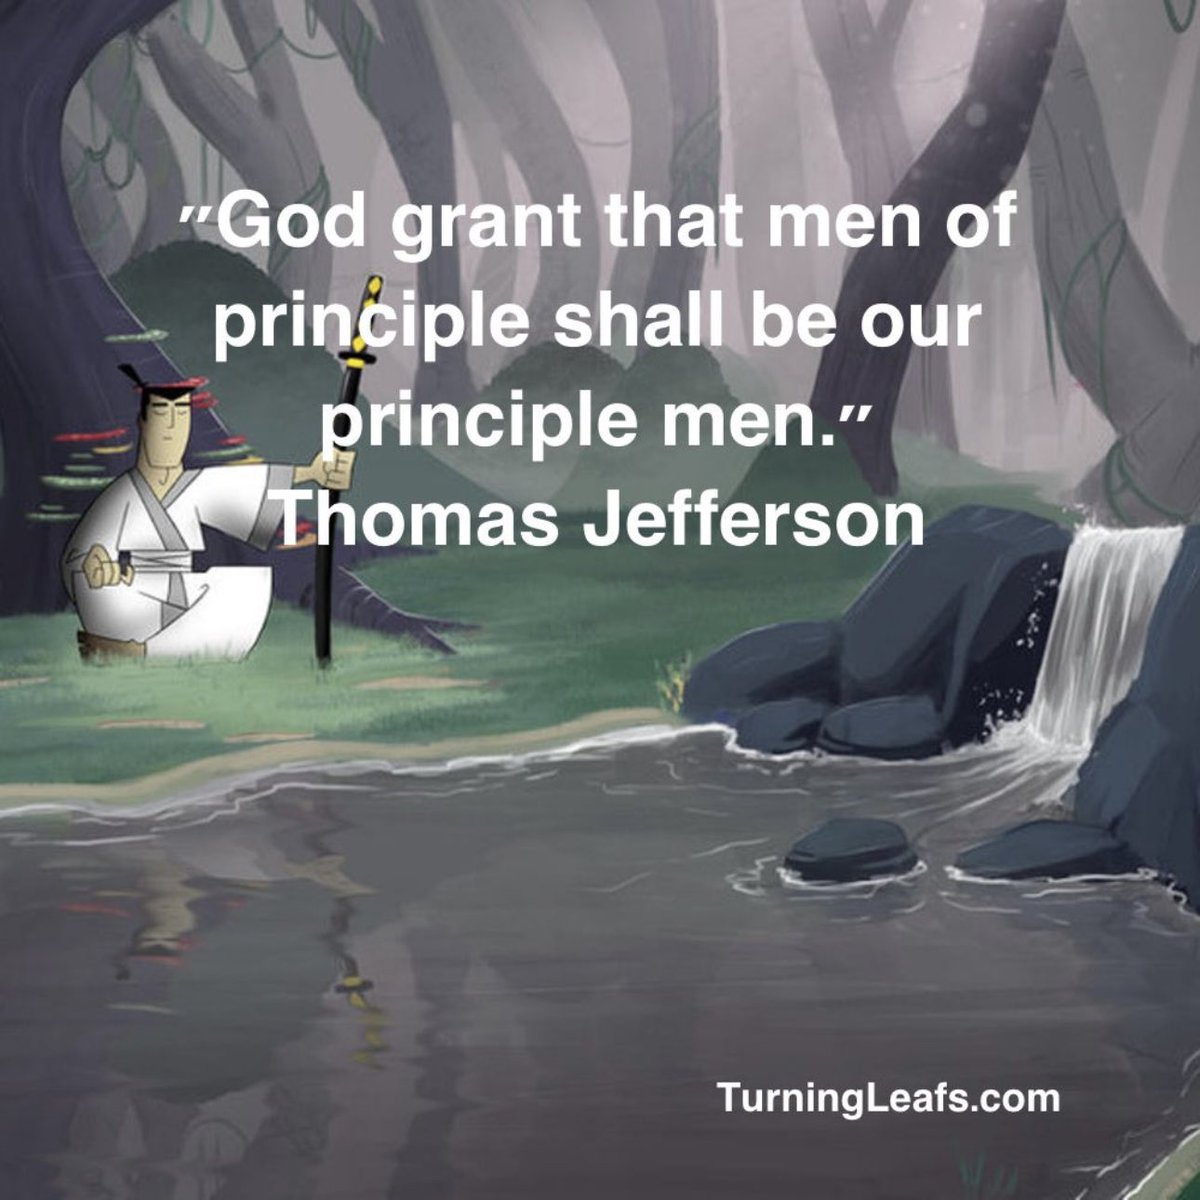 it’s those with values and principles that will be strong enough to lead #ThomasJefferson #TransformationCoach #GrowthCoach #ChristianCoach #aSignificantLife #WaketheLions #TLYAW #TurningLeafs